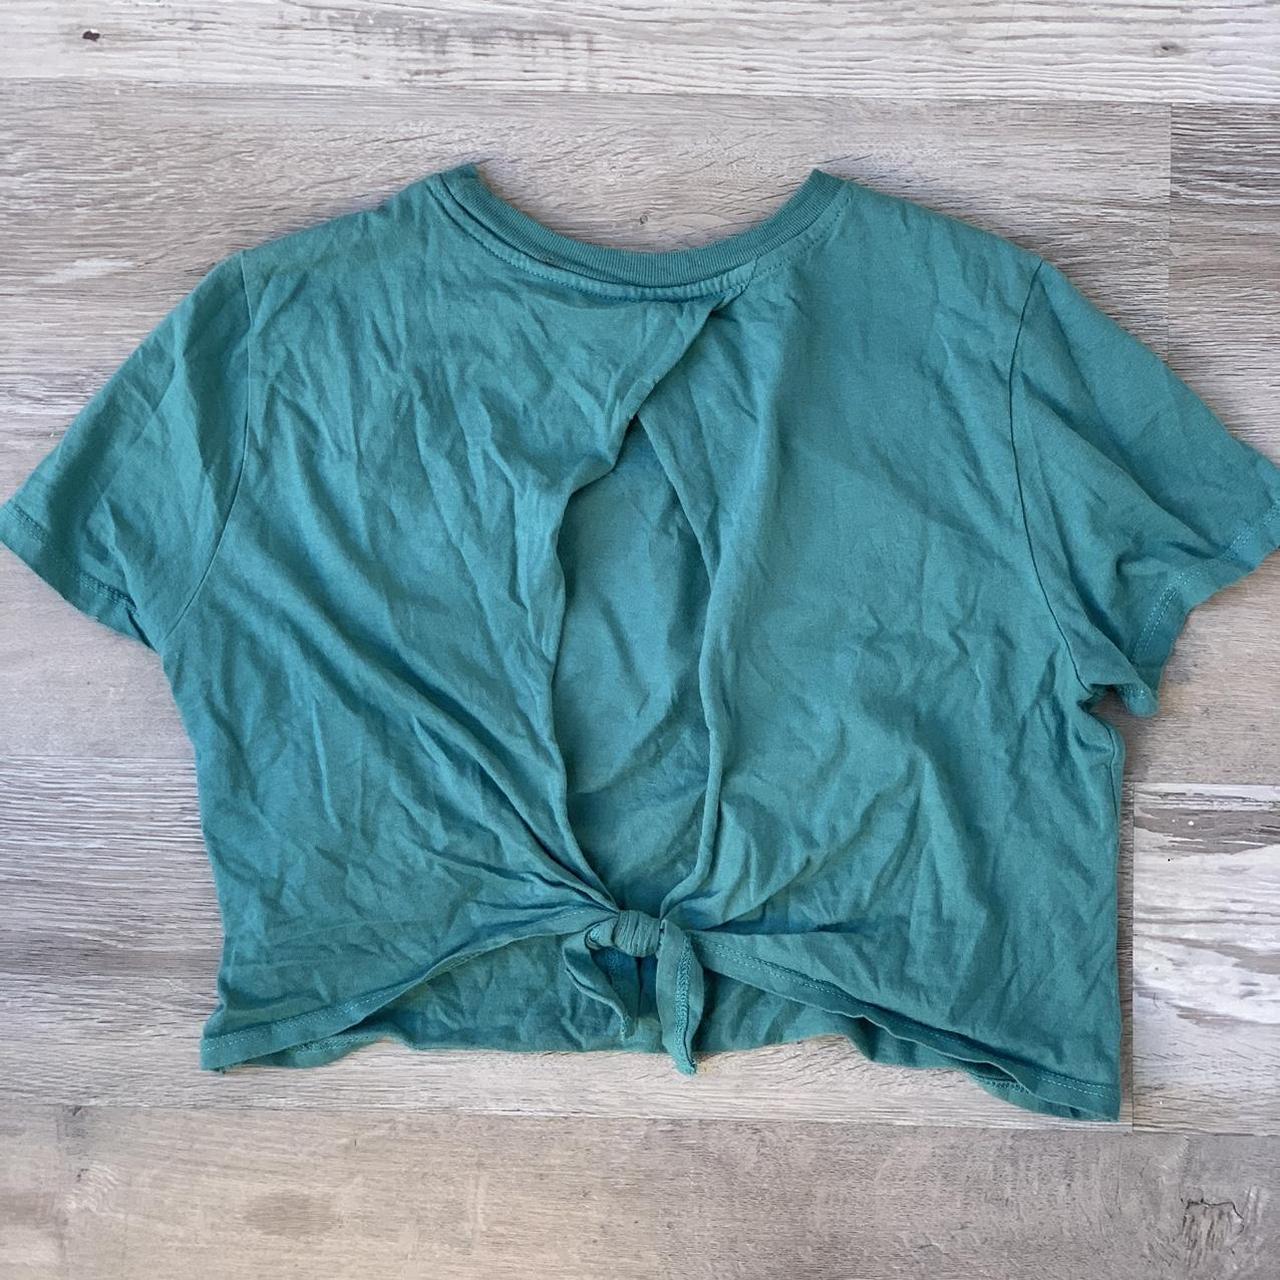 Cold Crush Women's Green and Blue Crop-top (2)